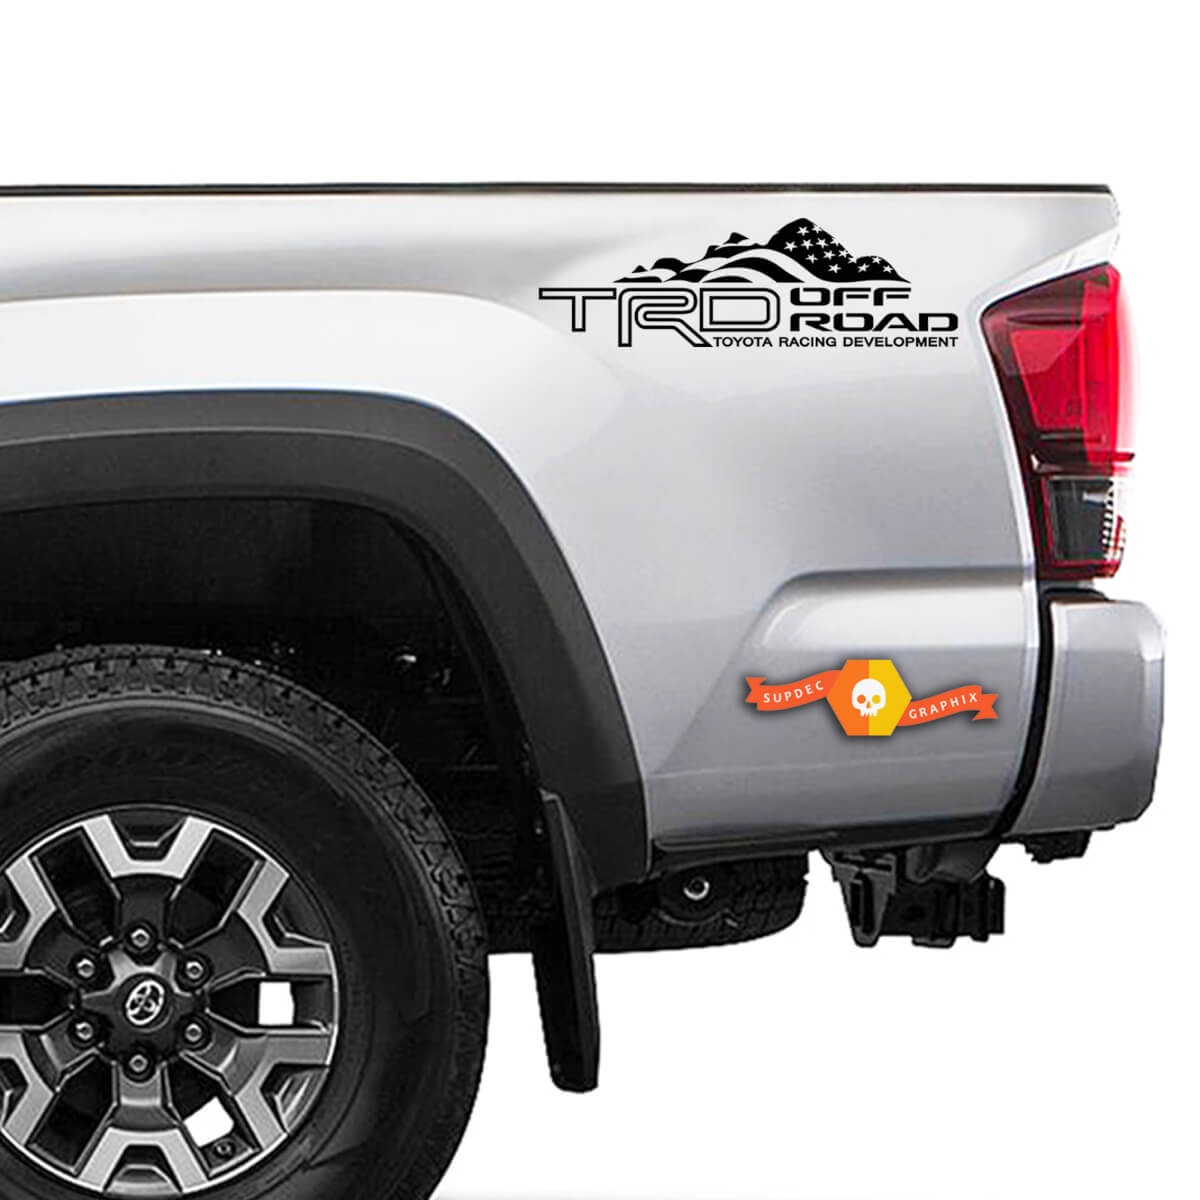 TRD Mountain American Flag Decals Stickers Vinyl Bedsides Toyota Truck Tacoma Tundra Off Road Graphic